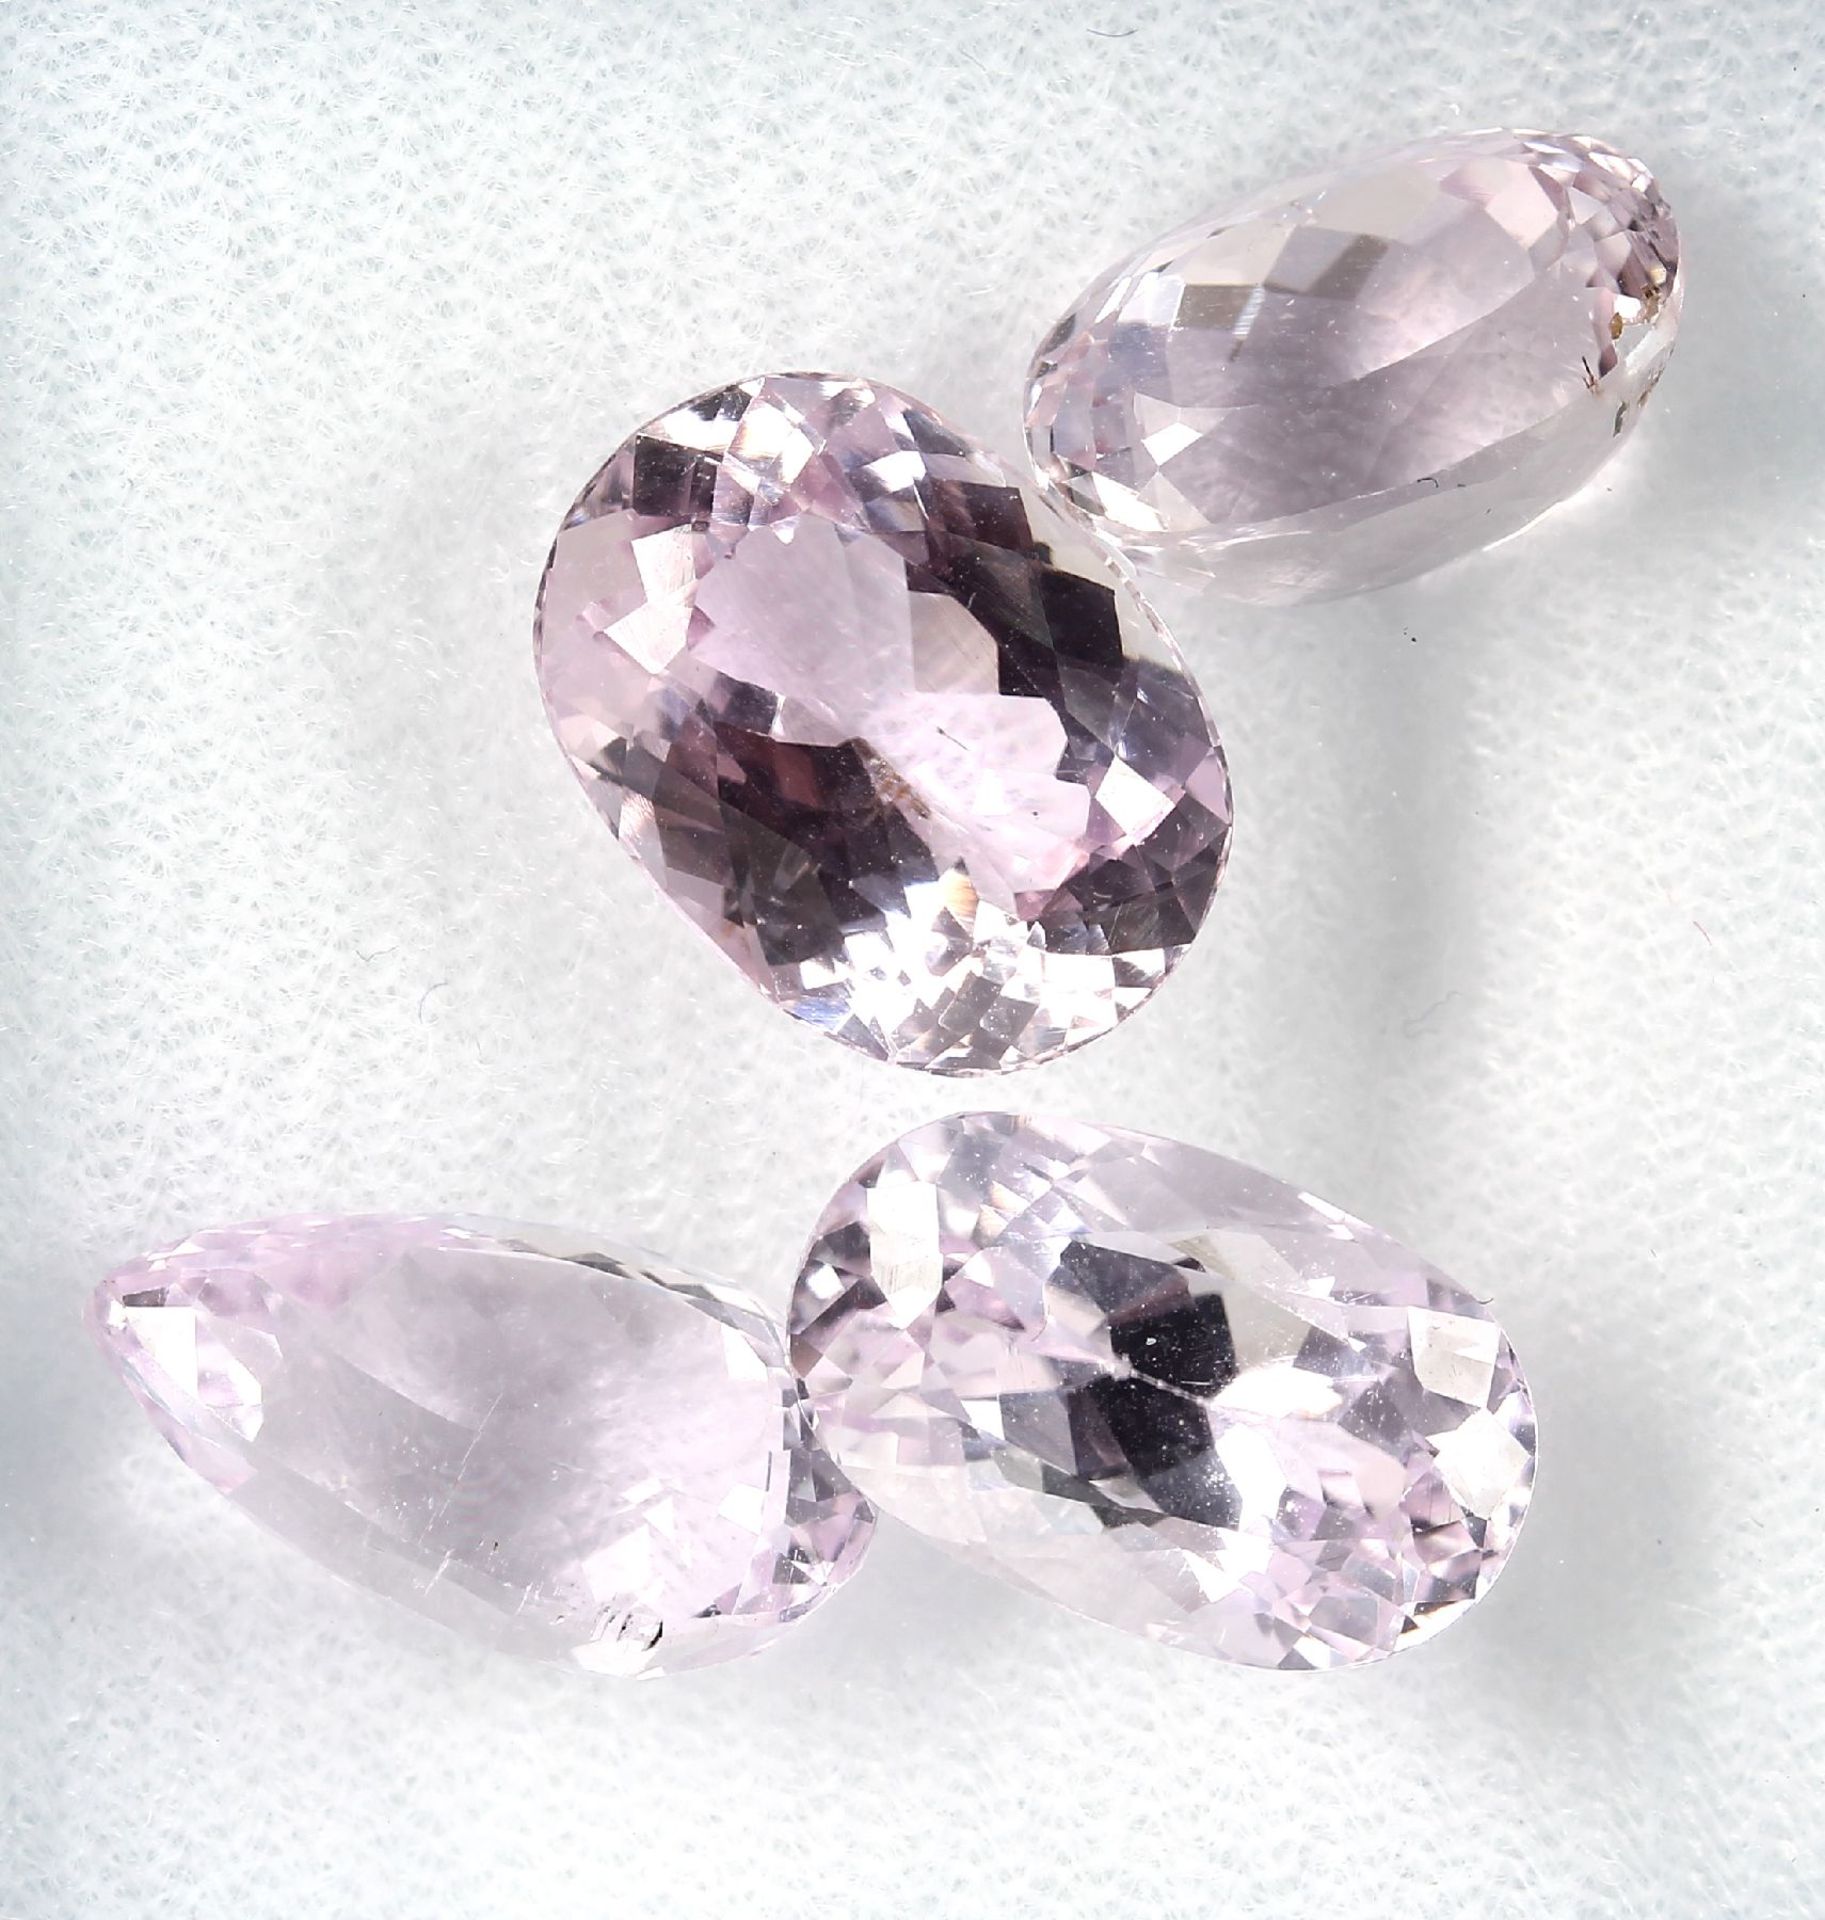 Lot 4 loose oval bevelled kunzites , total approx. 32.99 ct Valuation Price: 3400, - EURLot 4 lose